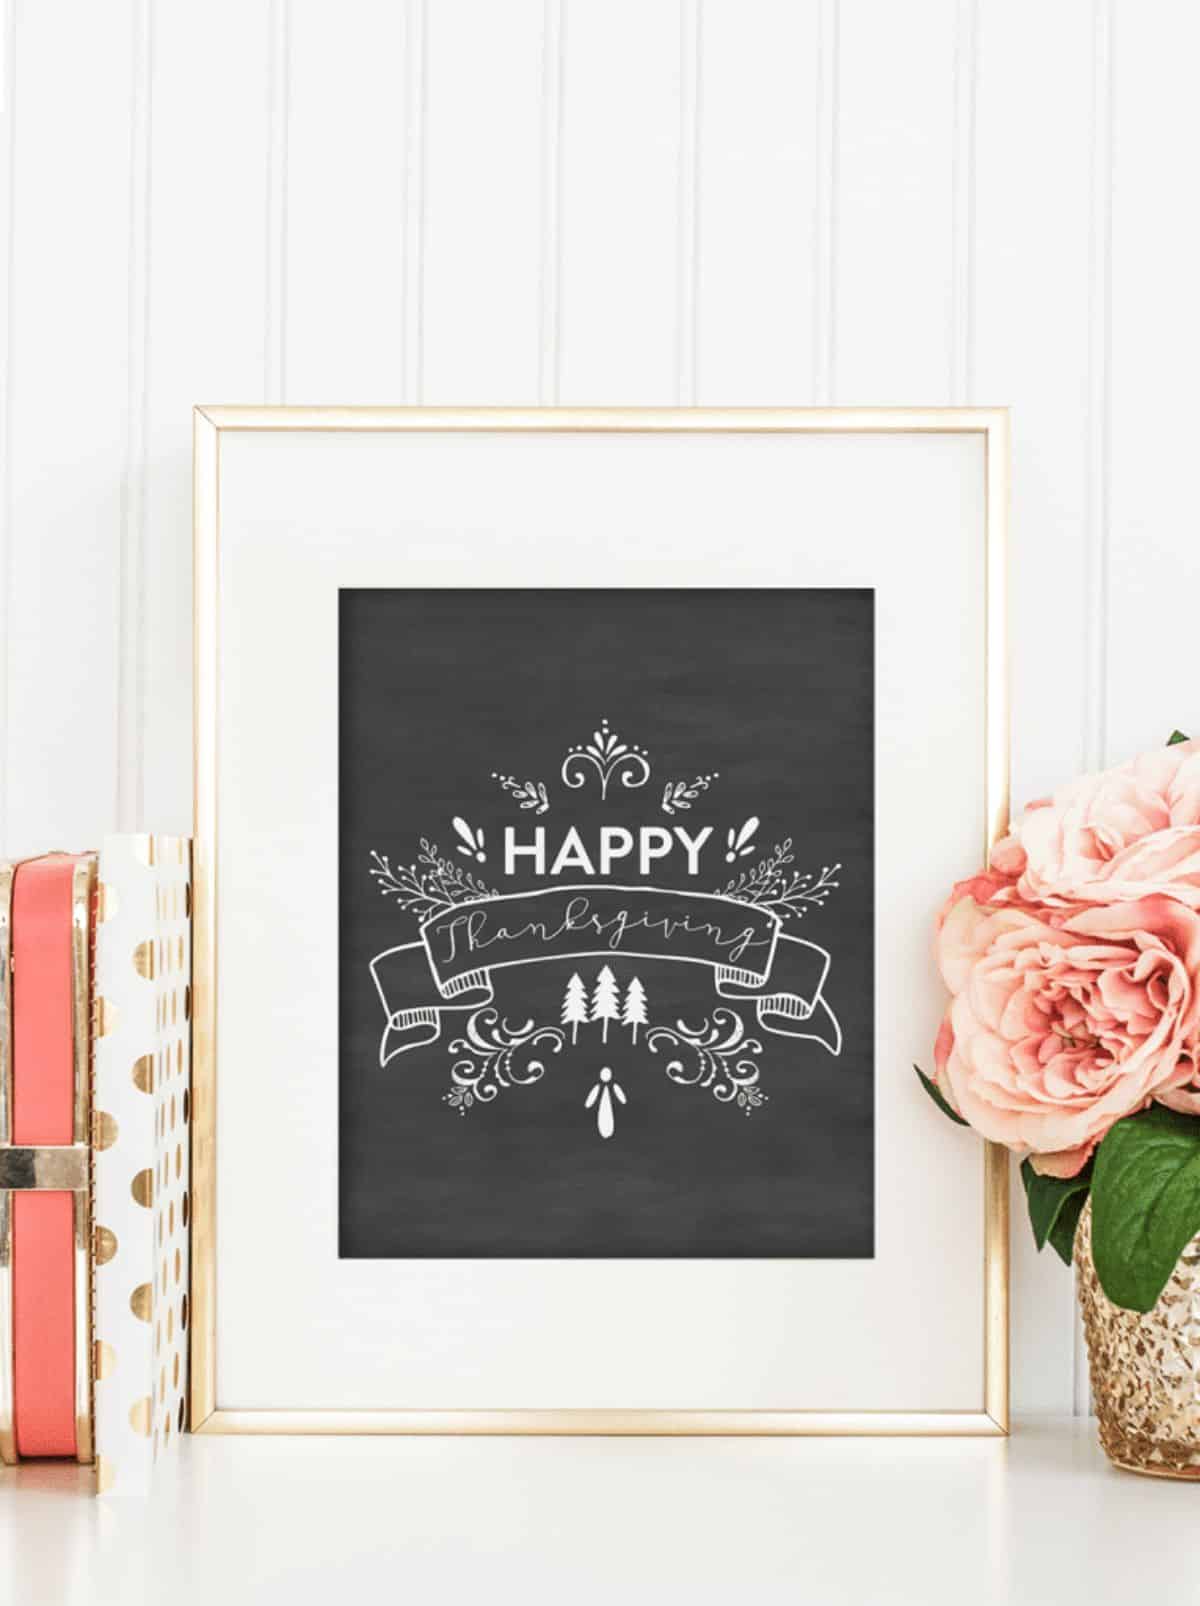 An easy and festive framed chalkboard print with the words "Happy Thanksgiving".